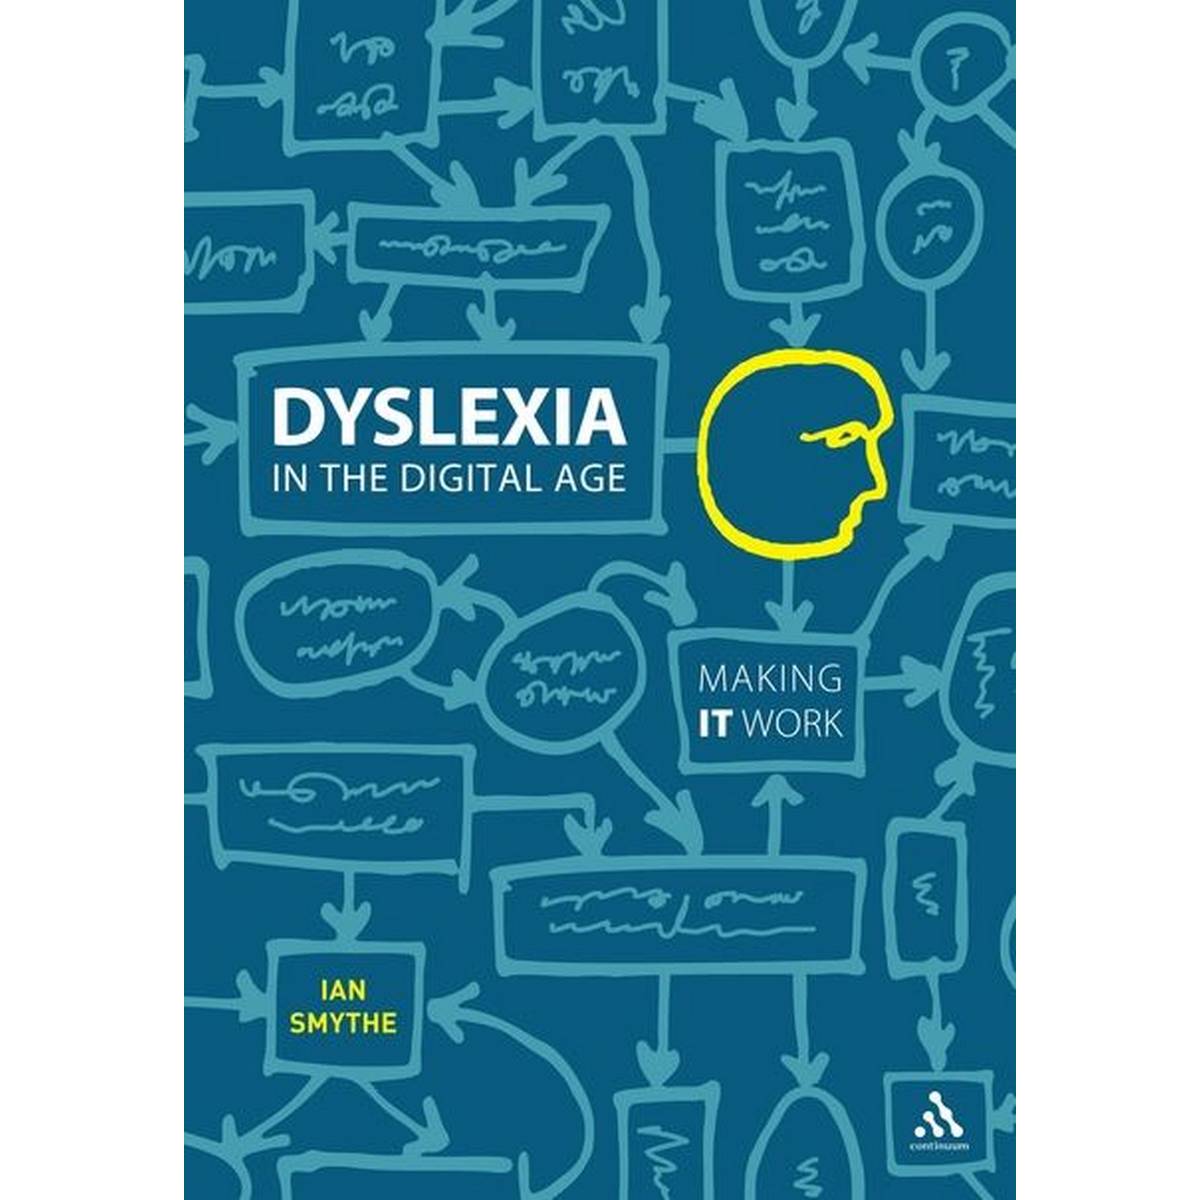 Dyslexia in the Digital Age: Making IT Work